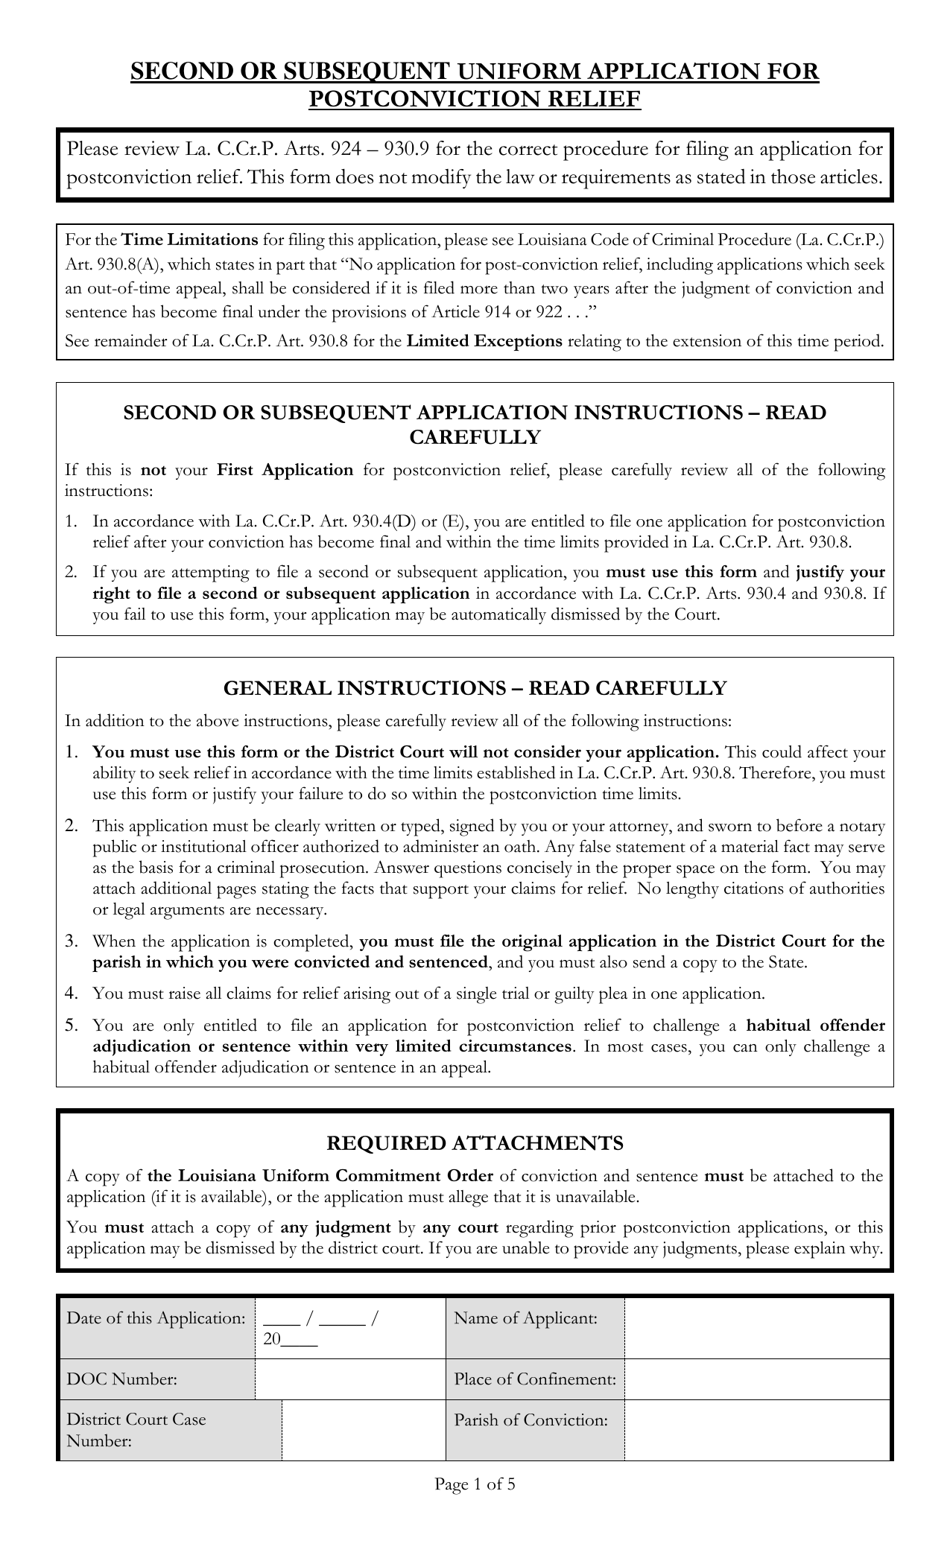 Second or Subsequent Uniform Application for Postconviction Relief - Louisiana, Page 1